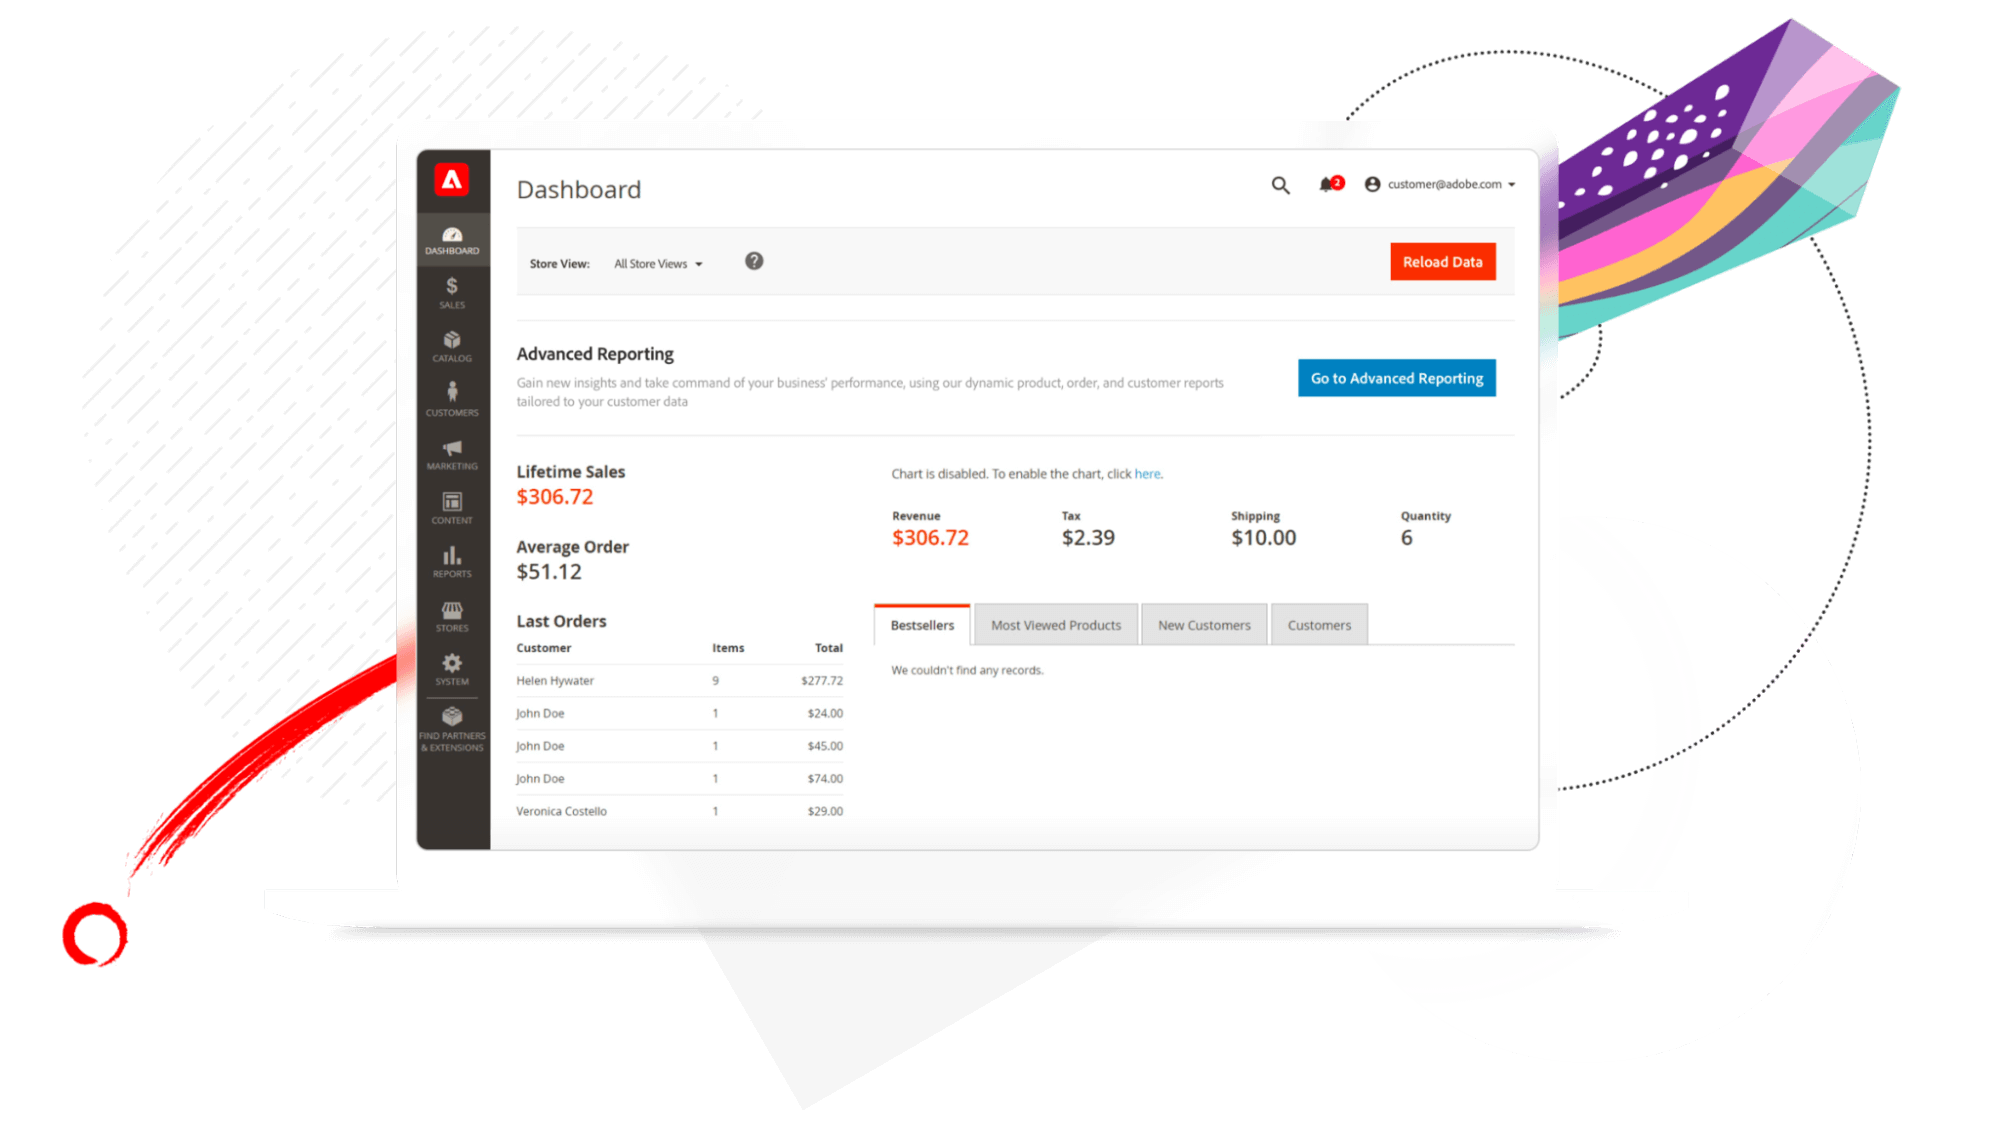 Adobe Commerce dashboard: Advanced reporting, lifetime sales, average order, and more.